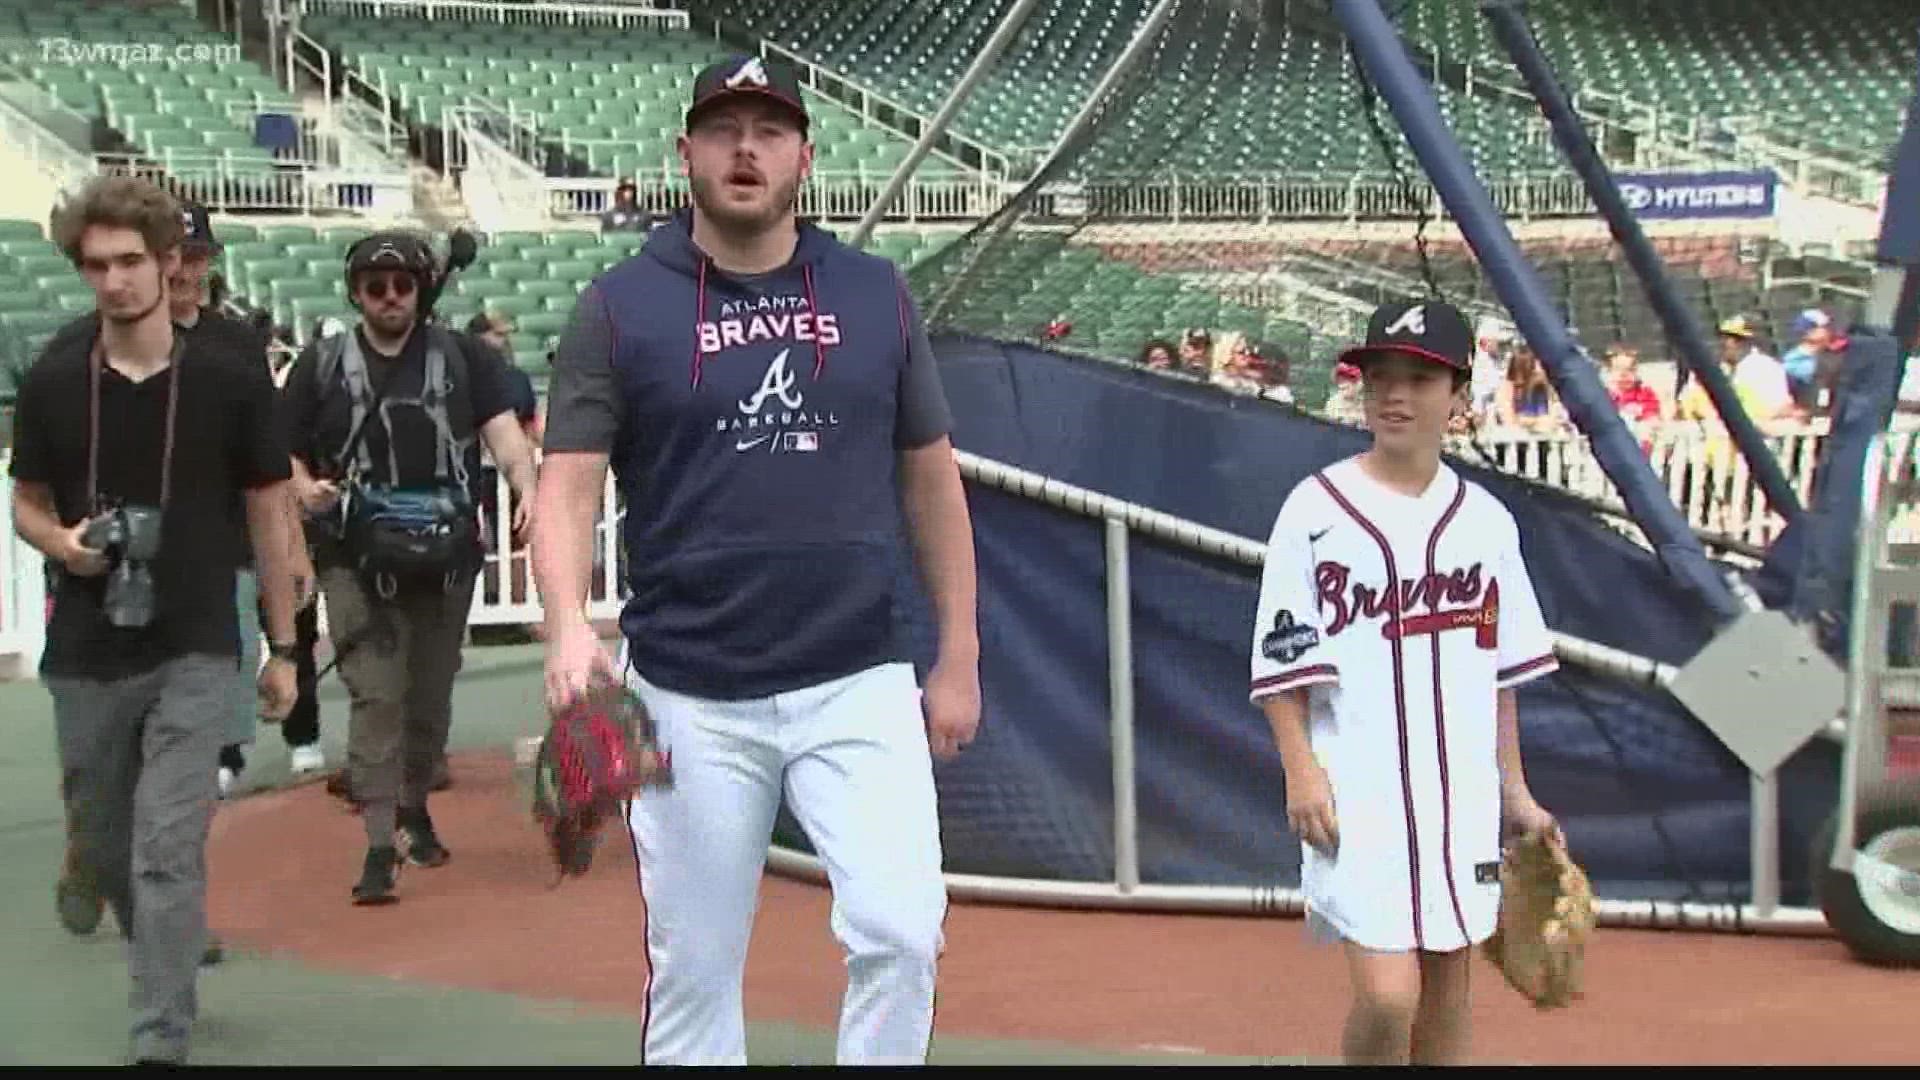 The Atlanta Braves granted a wish to FPD middle-schooler Jackson Hall earlier this summer before one of their home games, and it was a dream come true for him